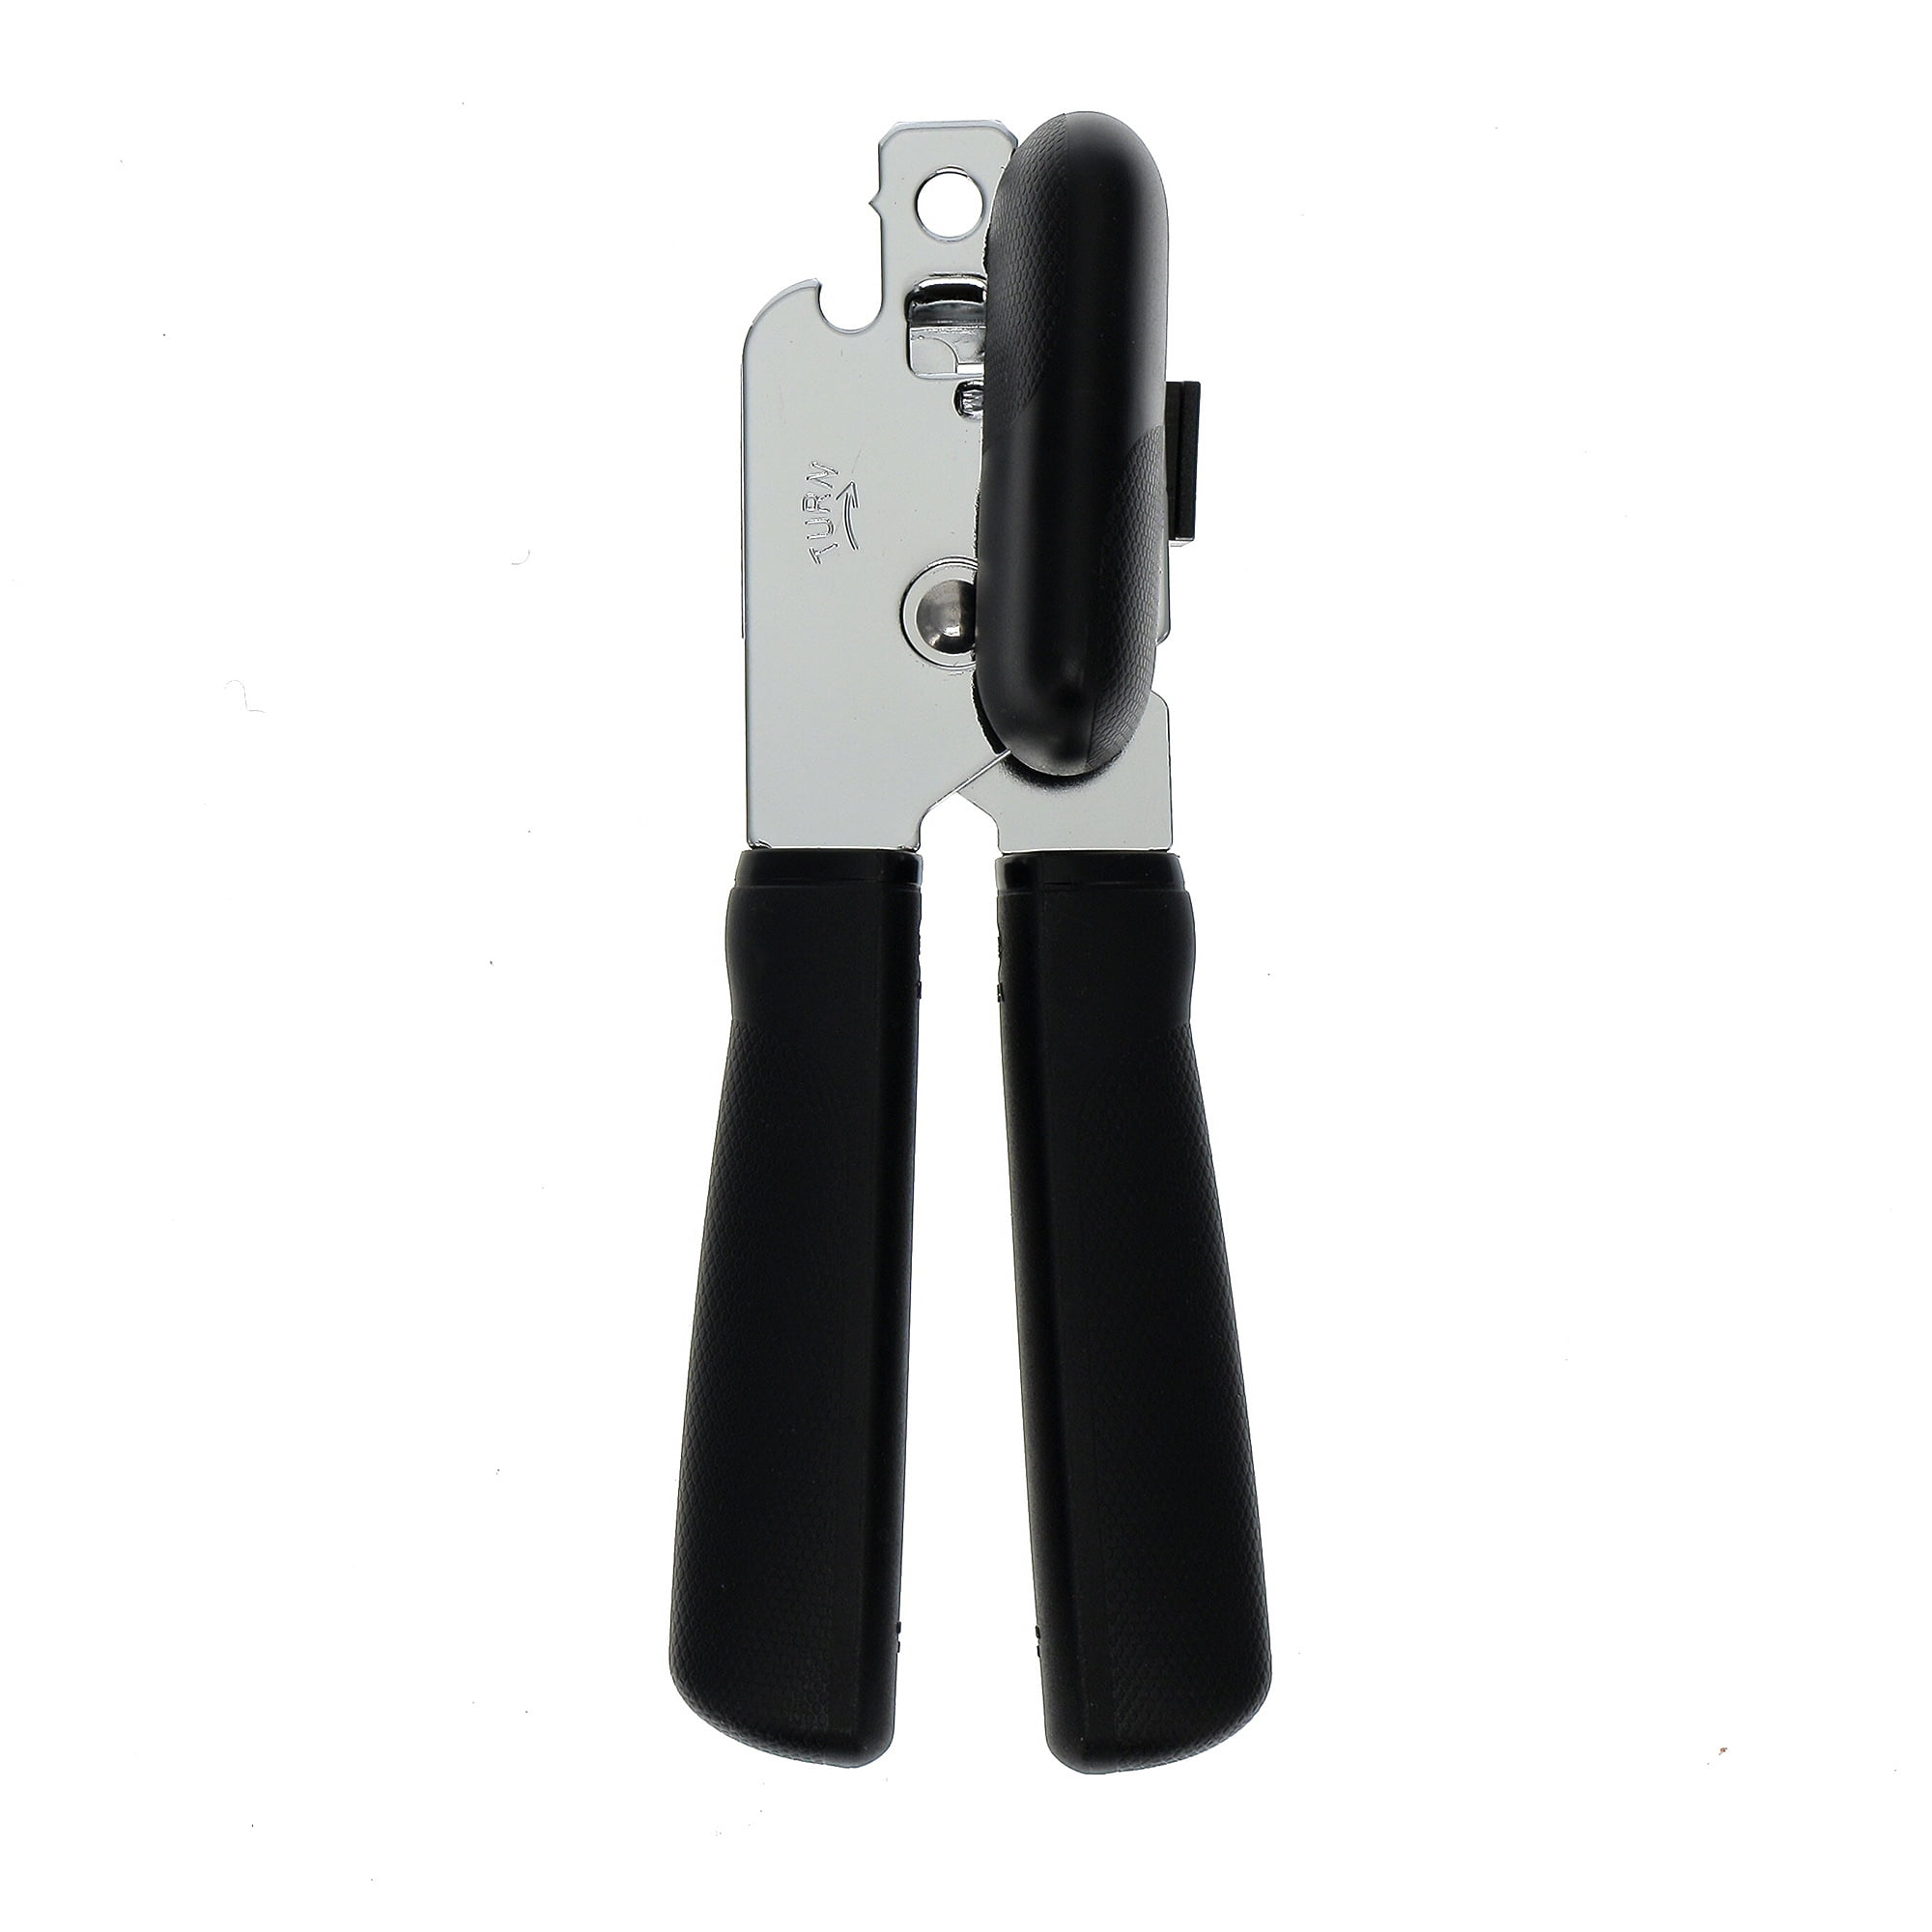 Mitsemmo Can Opener Manual, Non-electric Bottle Openers,Handheld Strong  Heavy Duty Can Opener, Anti-slip Hand Grip